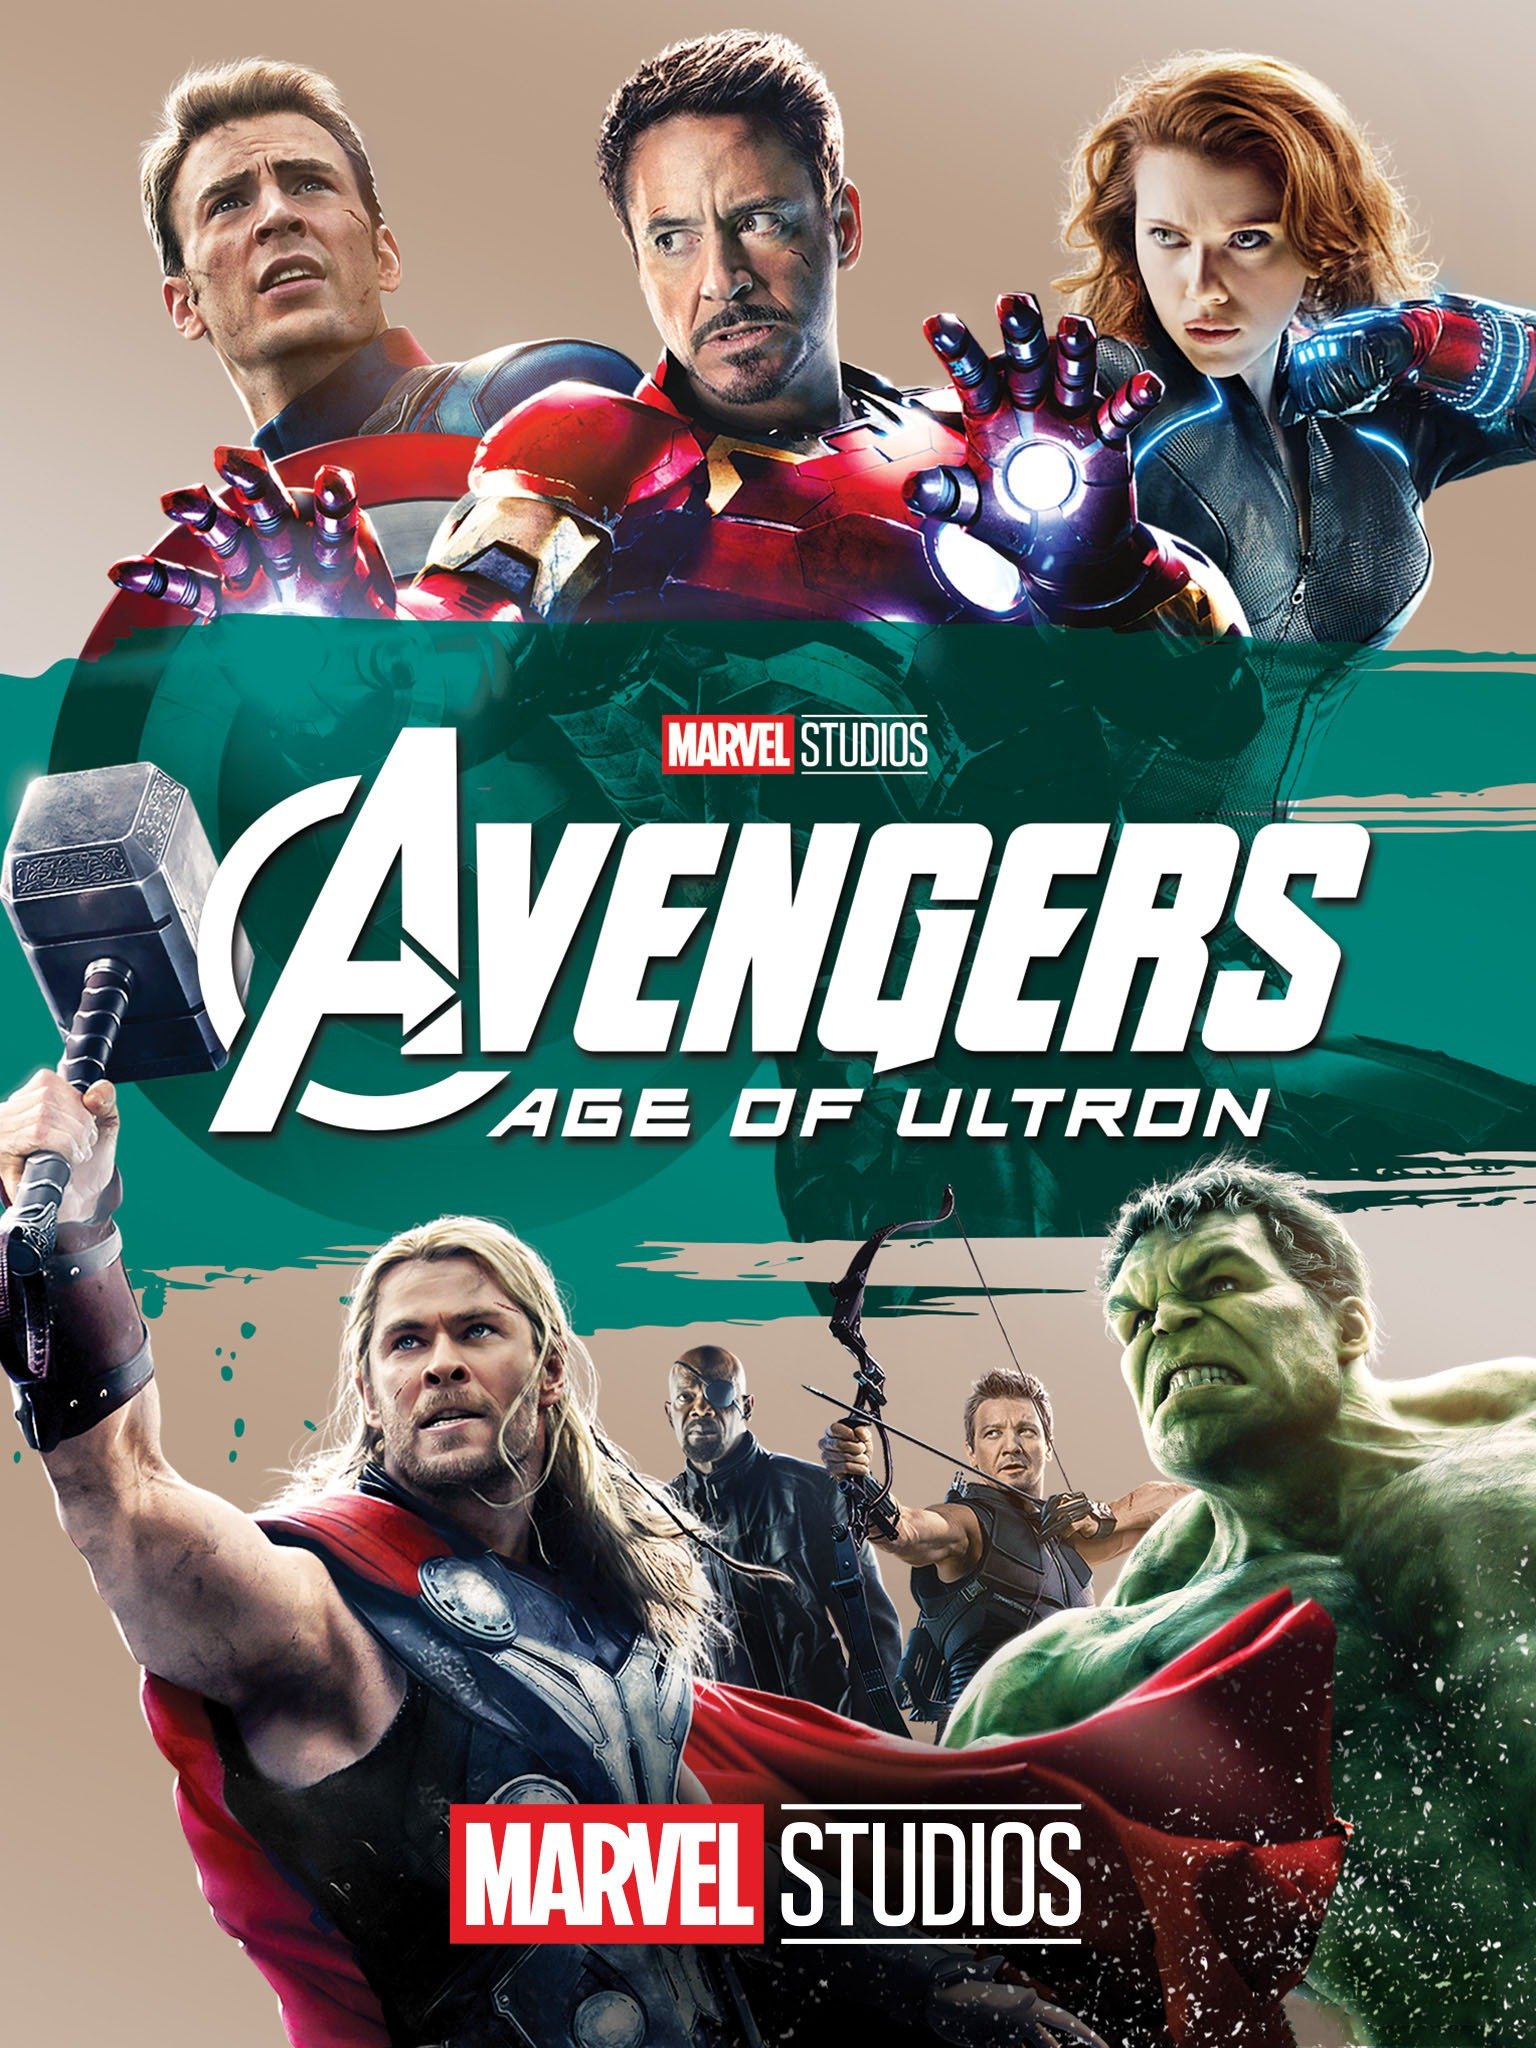 Avengers age of ultron full movie free download in hindi Avengers Age Of Ultron 2015 Rotten Tomatoes